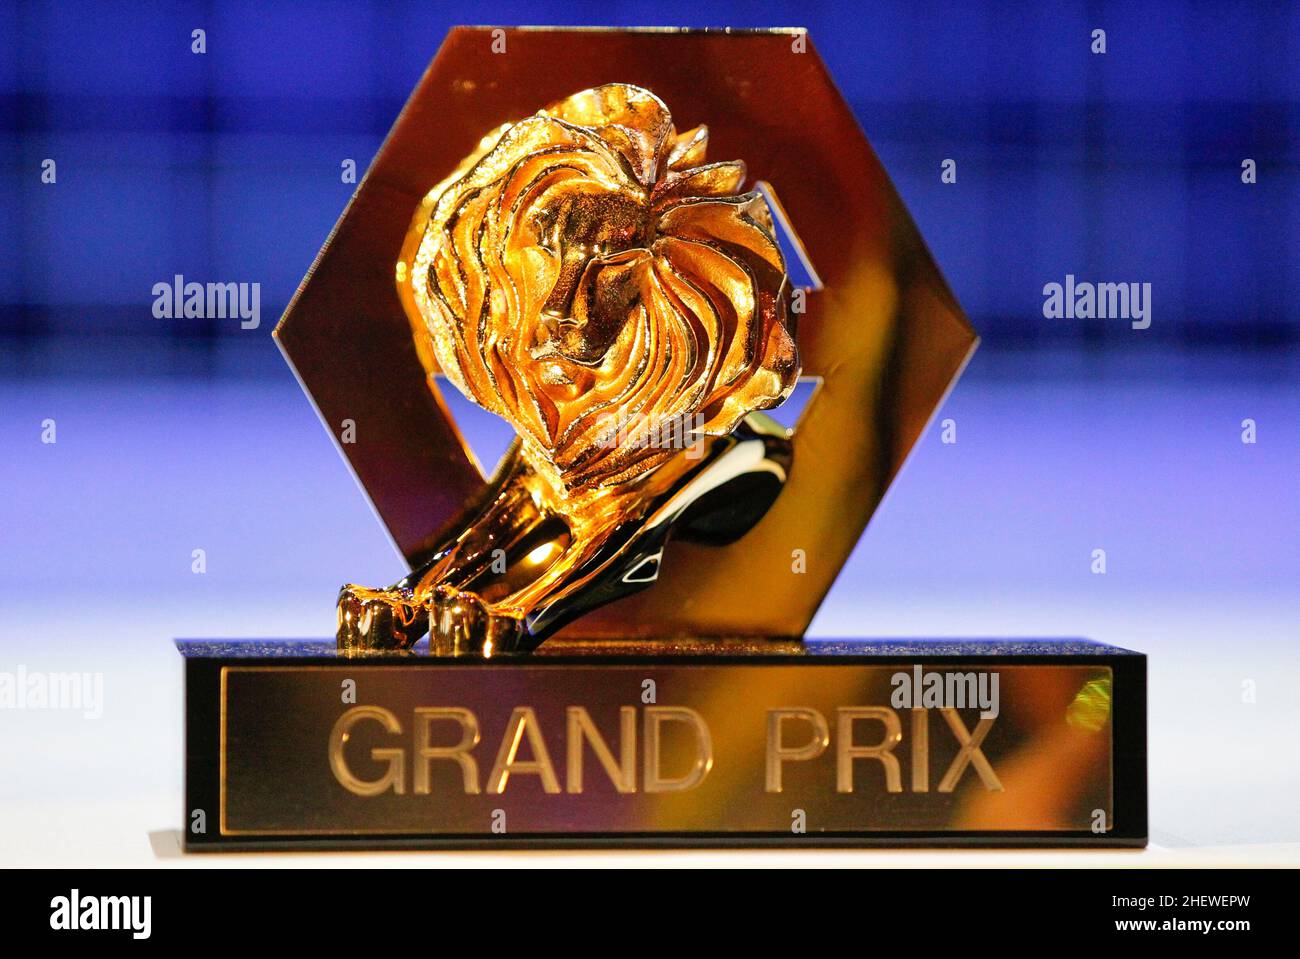 Cannes, France - June 21, 2011: Cannes Lions International Festival of Creativity by Ascential with the Grand Prix Trophy Awards at the Palais des Festivals. Award, Lion, Advertising, Trophäe, Werbung, Marketing, Loewe. Mandoga Media Germany Stock Photo